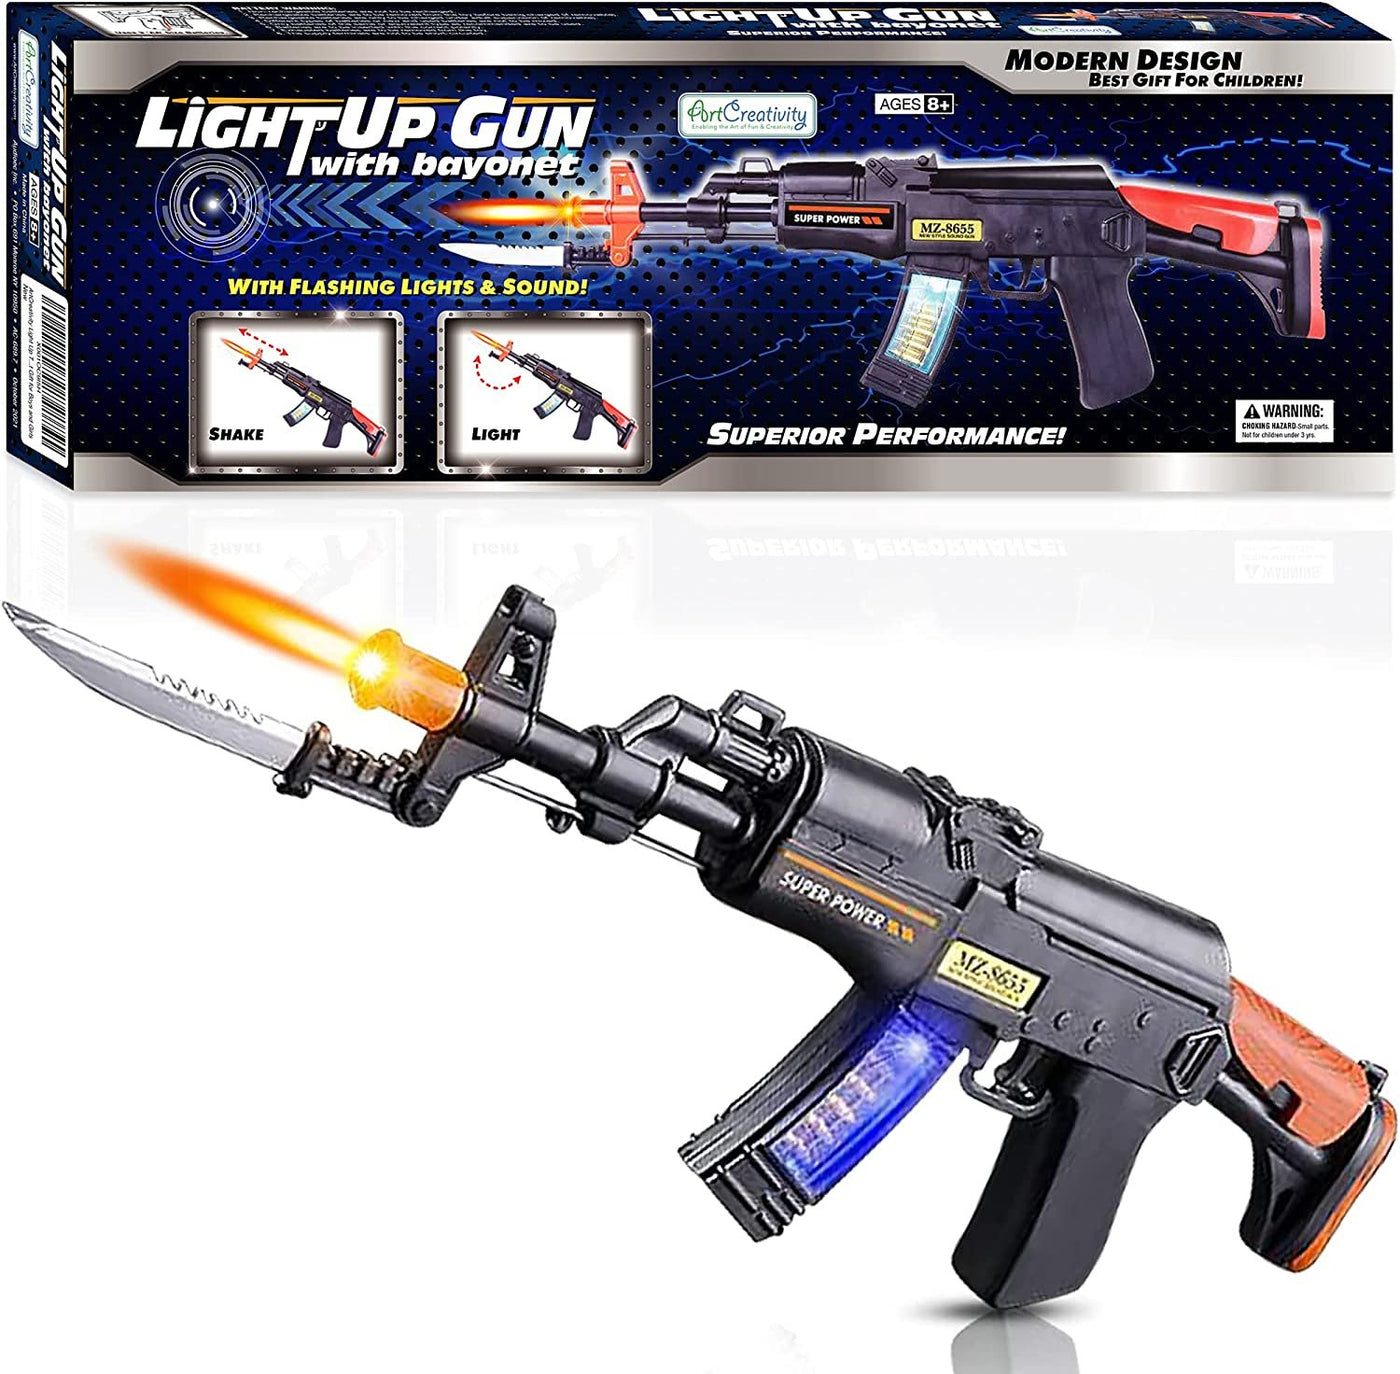 Light Up Toy Machine Gun with Folding Bayonet by ArtCreativity, Cool LED, Sound and Vibration Effect, 16 Inch Pretend Play Military Submachine Pistol, Great Gift for Boys and Girls